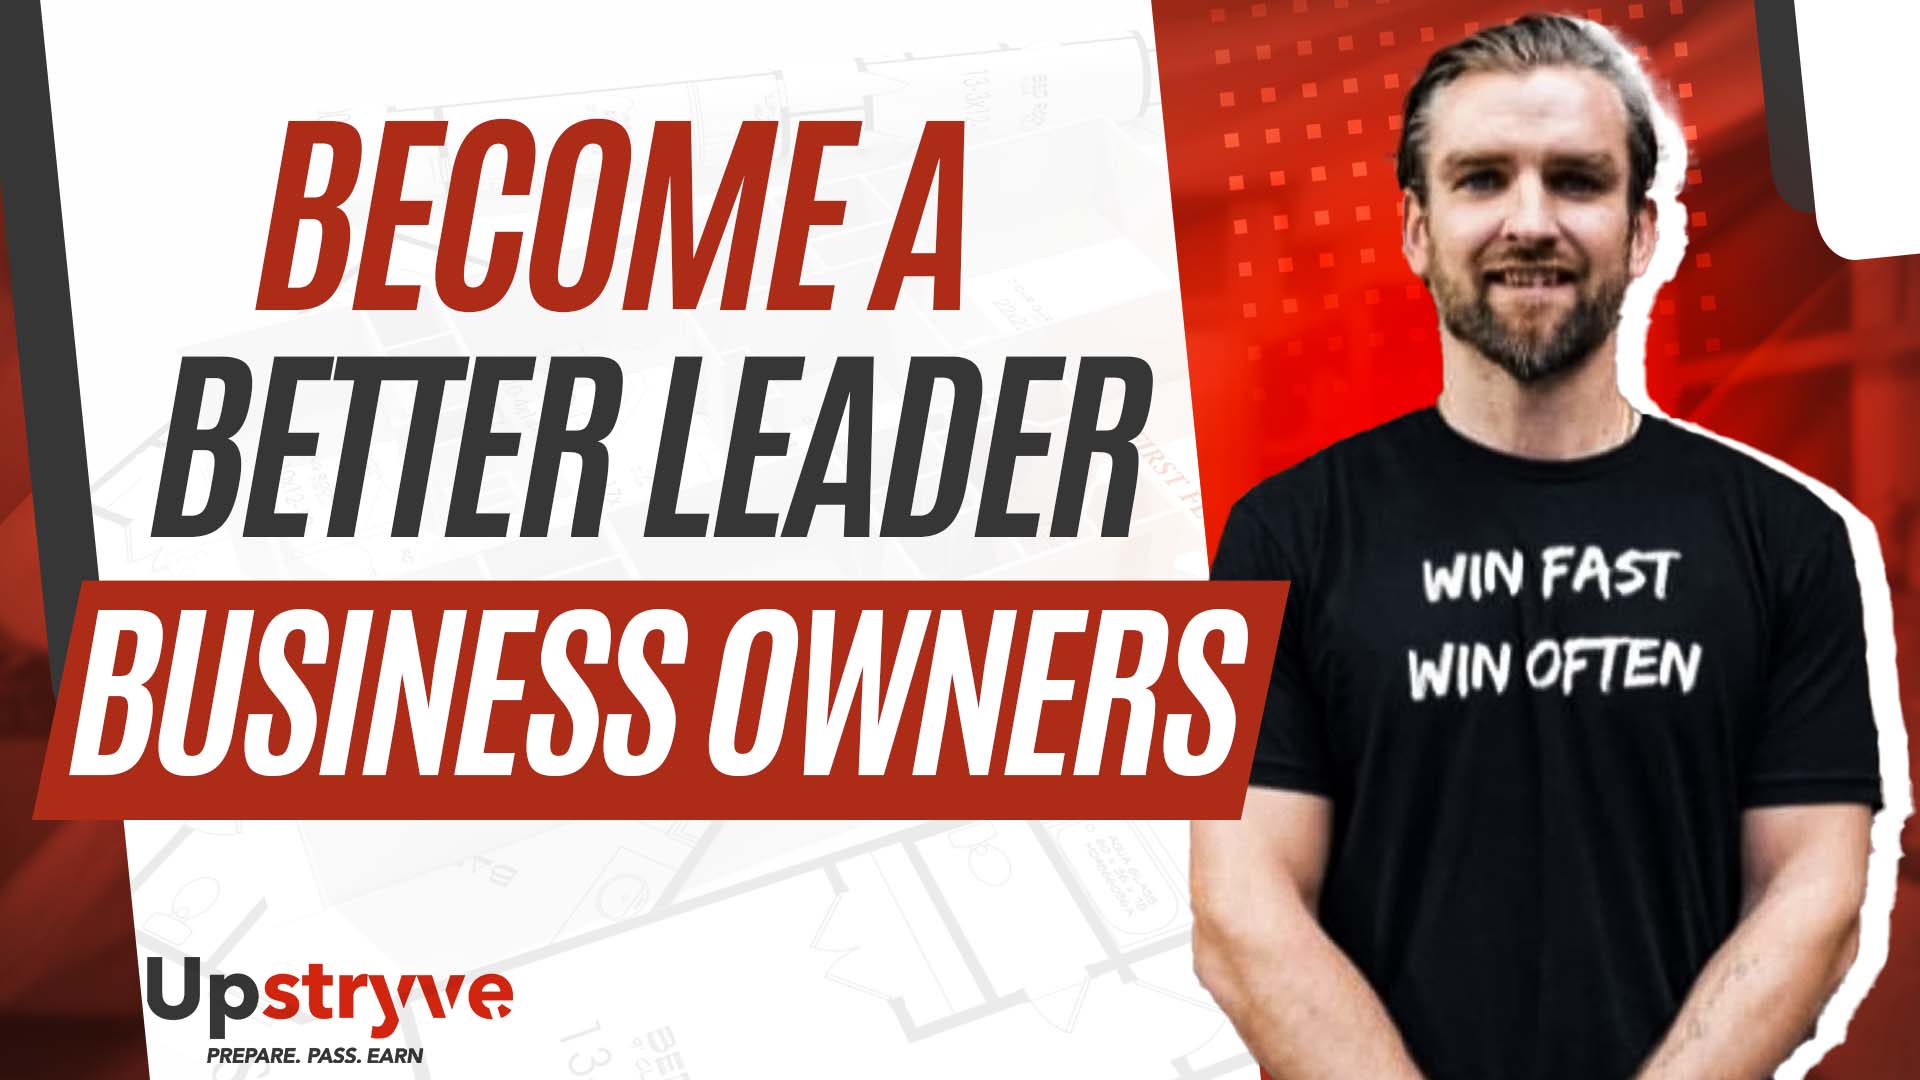 Josh Meunier is a Business Consultant & Coach at Winrate Consulting. He has multiple years of experience as a business owner and managed to sell one of his companies for multiple six figures. In today's video, he goes over how to properly incentivize your employees so they do excellent work and how you can become a better leader for your company. You'll learn about the importance of communication with your team and why you might not even need to spend an extra dollar motivating an employee to do their best work.